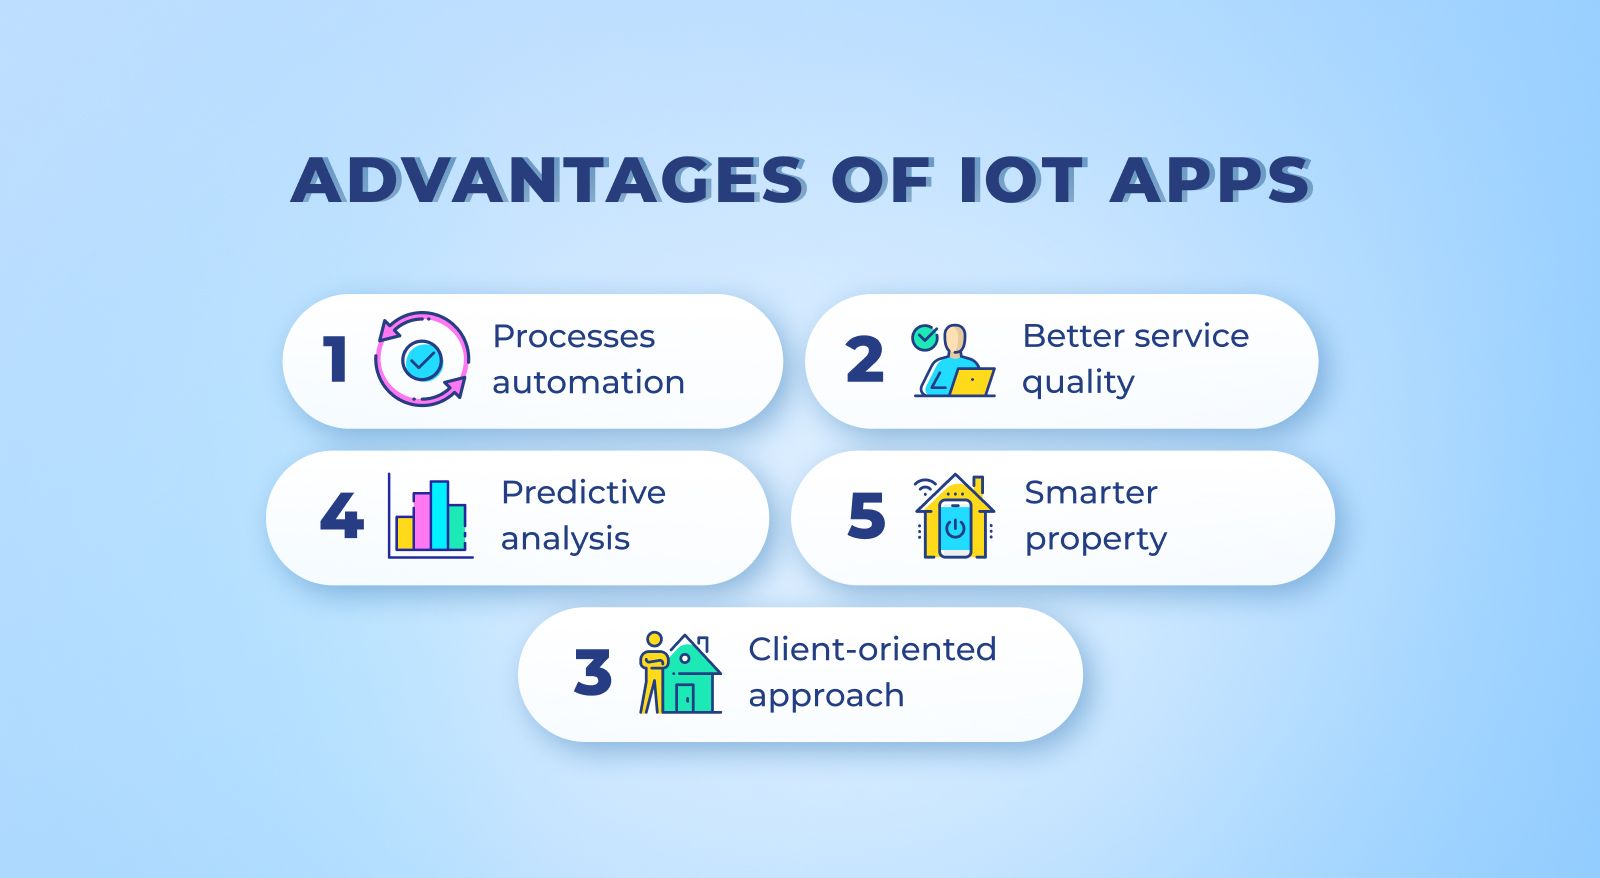 Advantages-of-IoT-apps.jpg